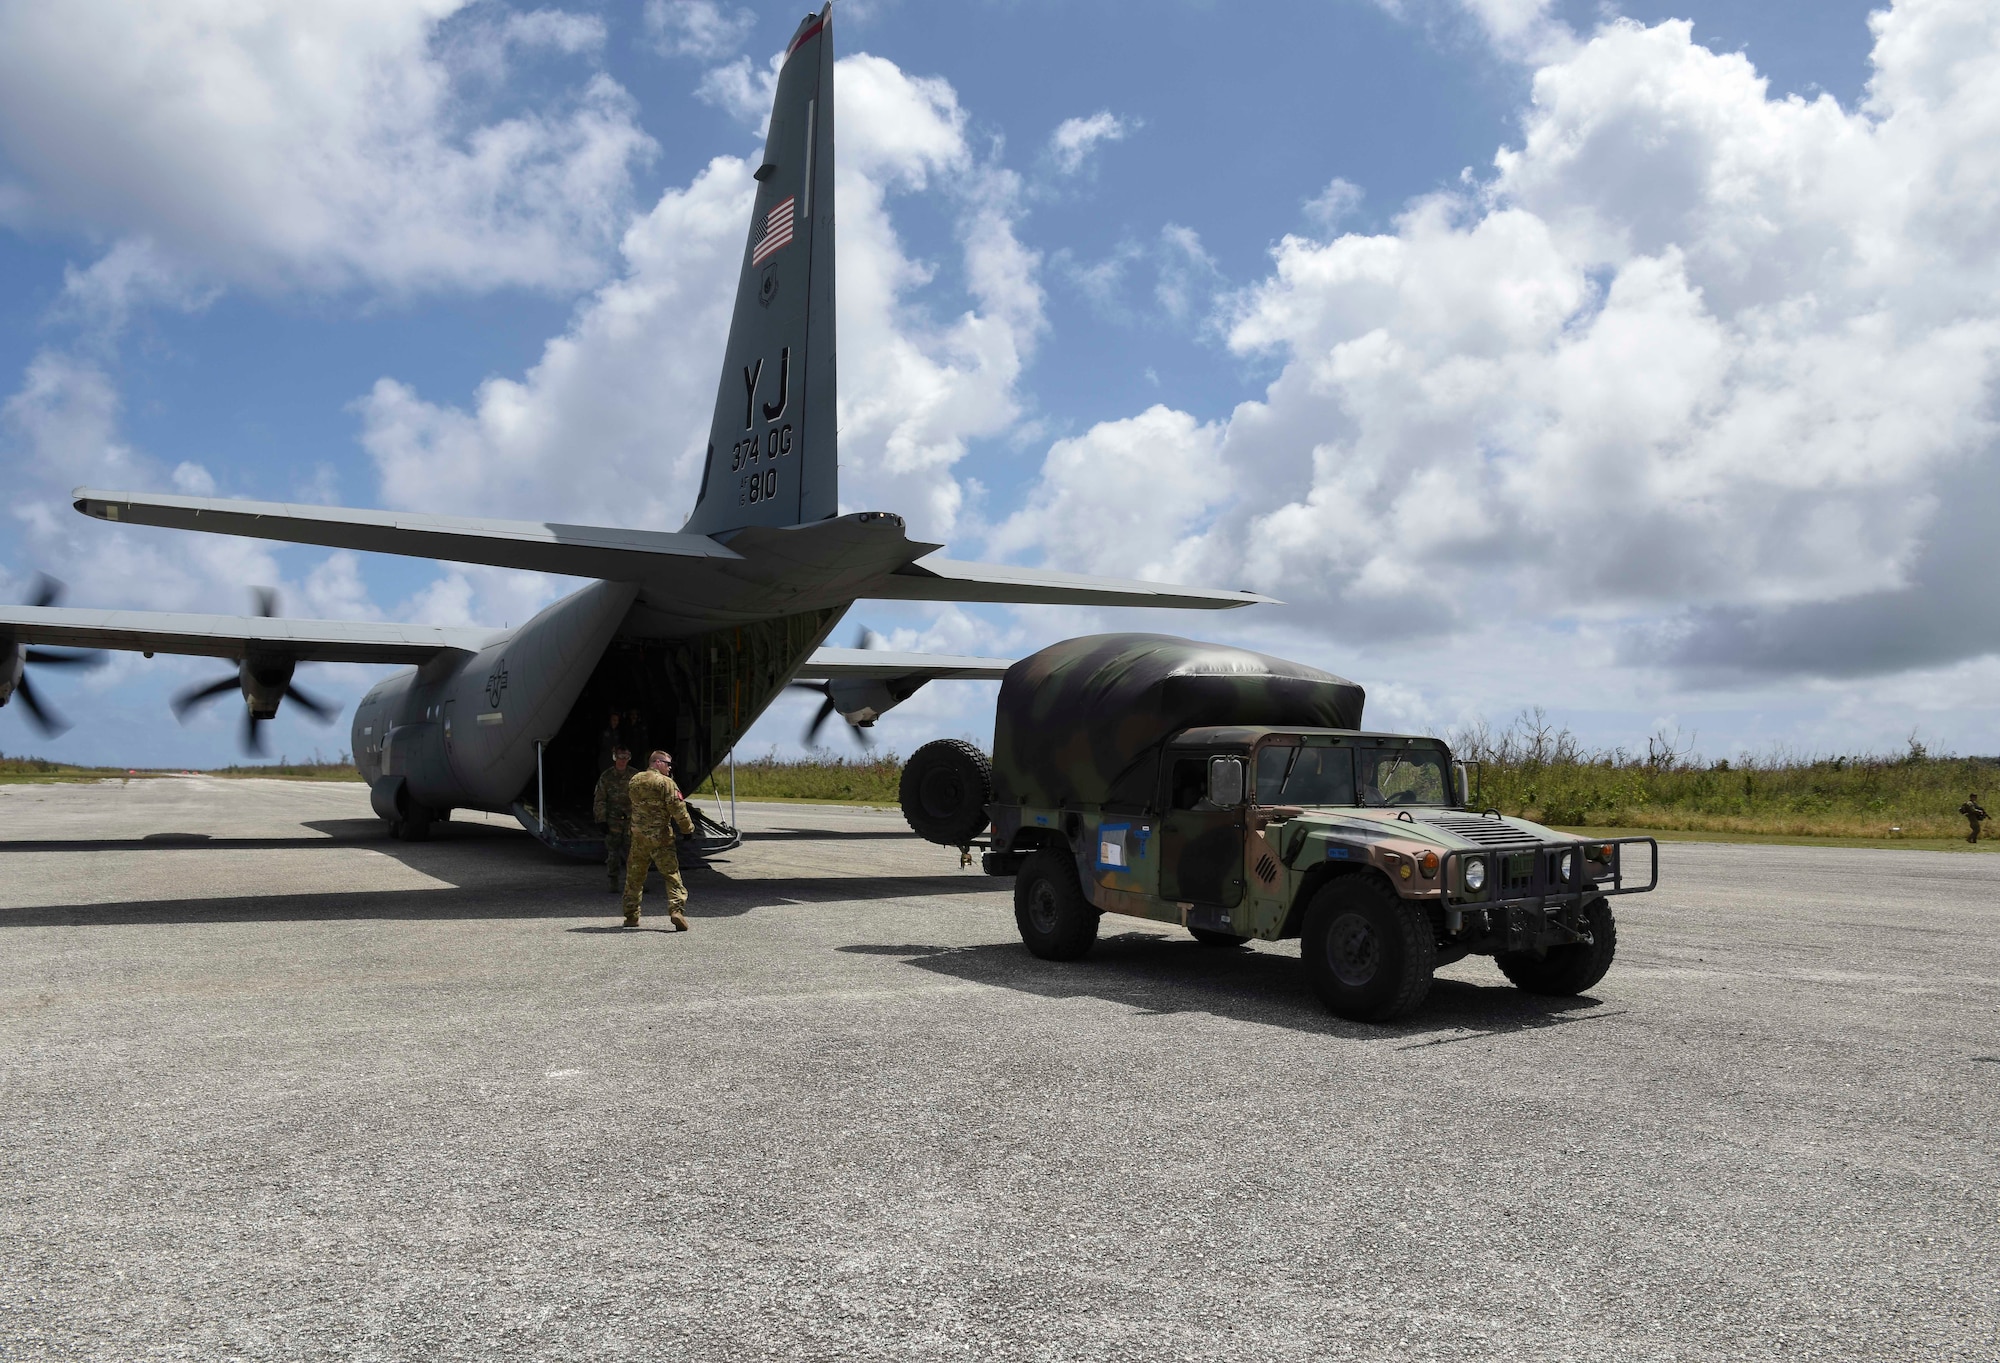 United States service members transfer personnel with simulated injuries onto a C-130J from Yokota Air Base, Japan, during an exercise for Cope North 2019, Feb. 27, 2019, at Tinian, Commonwealth of the Northern Marianas. On Feb. 27, service members from the U.S., Royal Australian Air Force, and the Japan Air Self-Defense Force exercised their Humanitarian Assistance and Disaster Relief skills together on Tinian by providing emergency medical care and secure transportation for simulated patients. (U.S. Air Force photo by Tech. Sgt. Jake Barreiro)